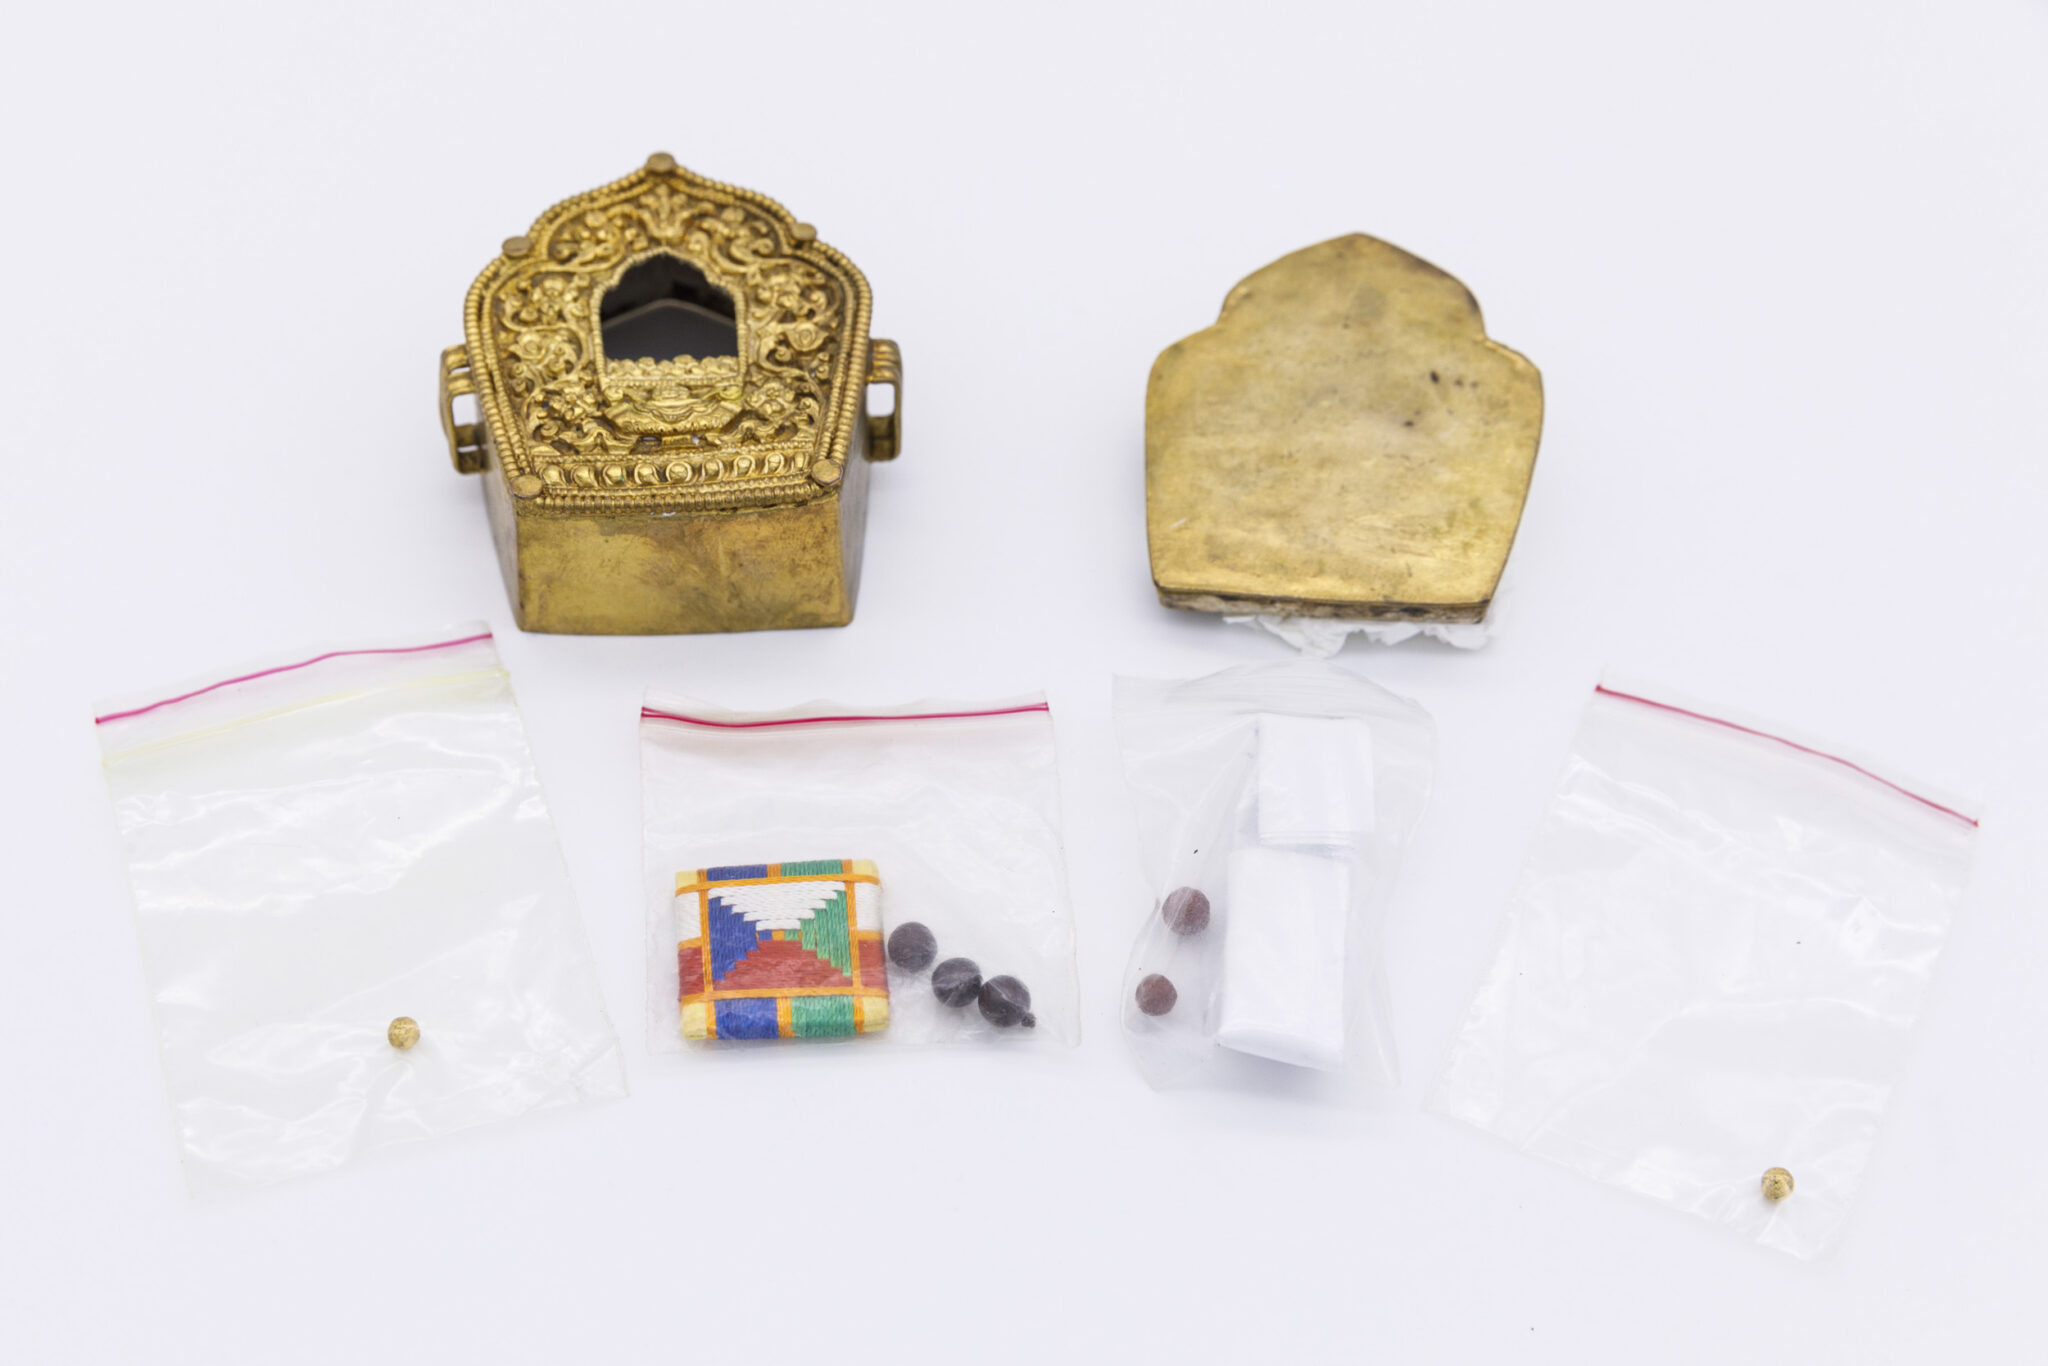 Golden nimbus-shaped box decorated with scrollwork; contents (beads, colorful square) displayed in plastic baggies